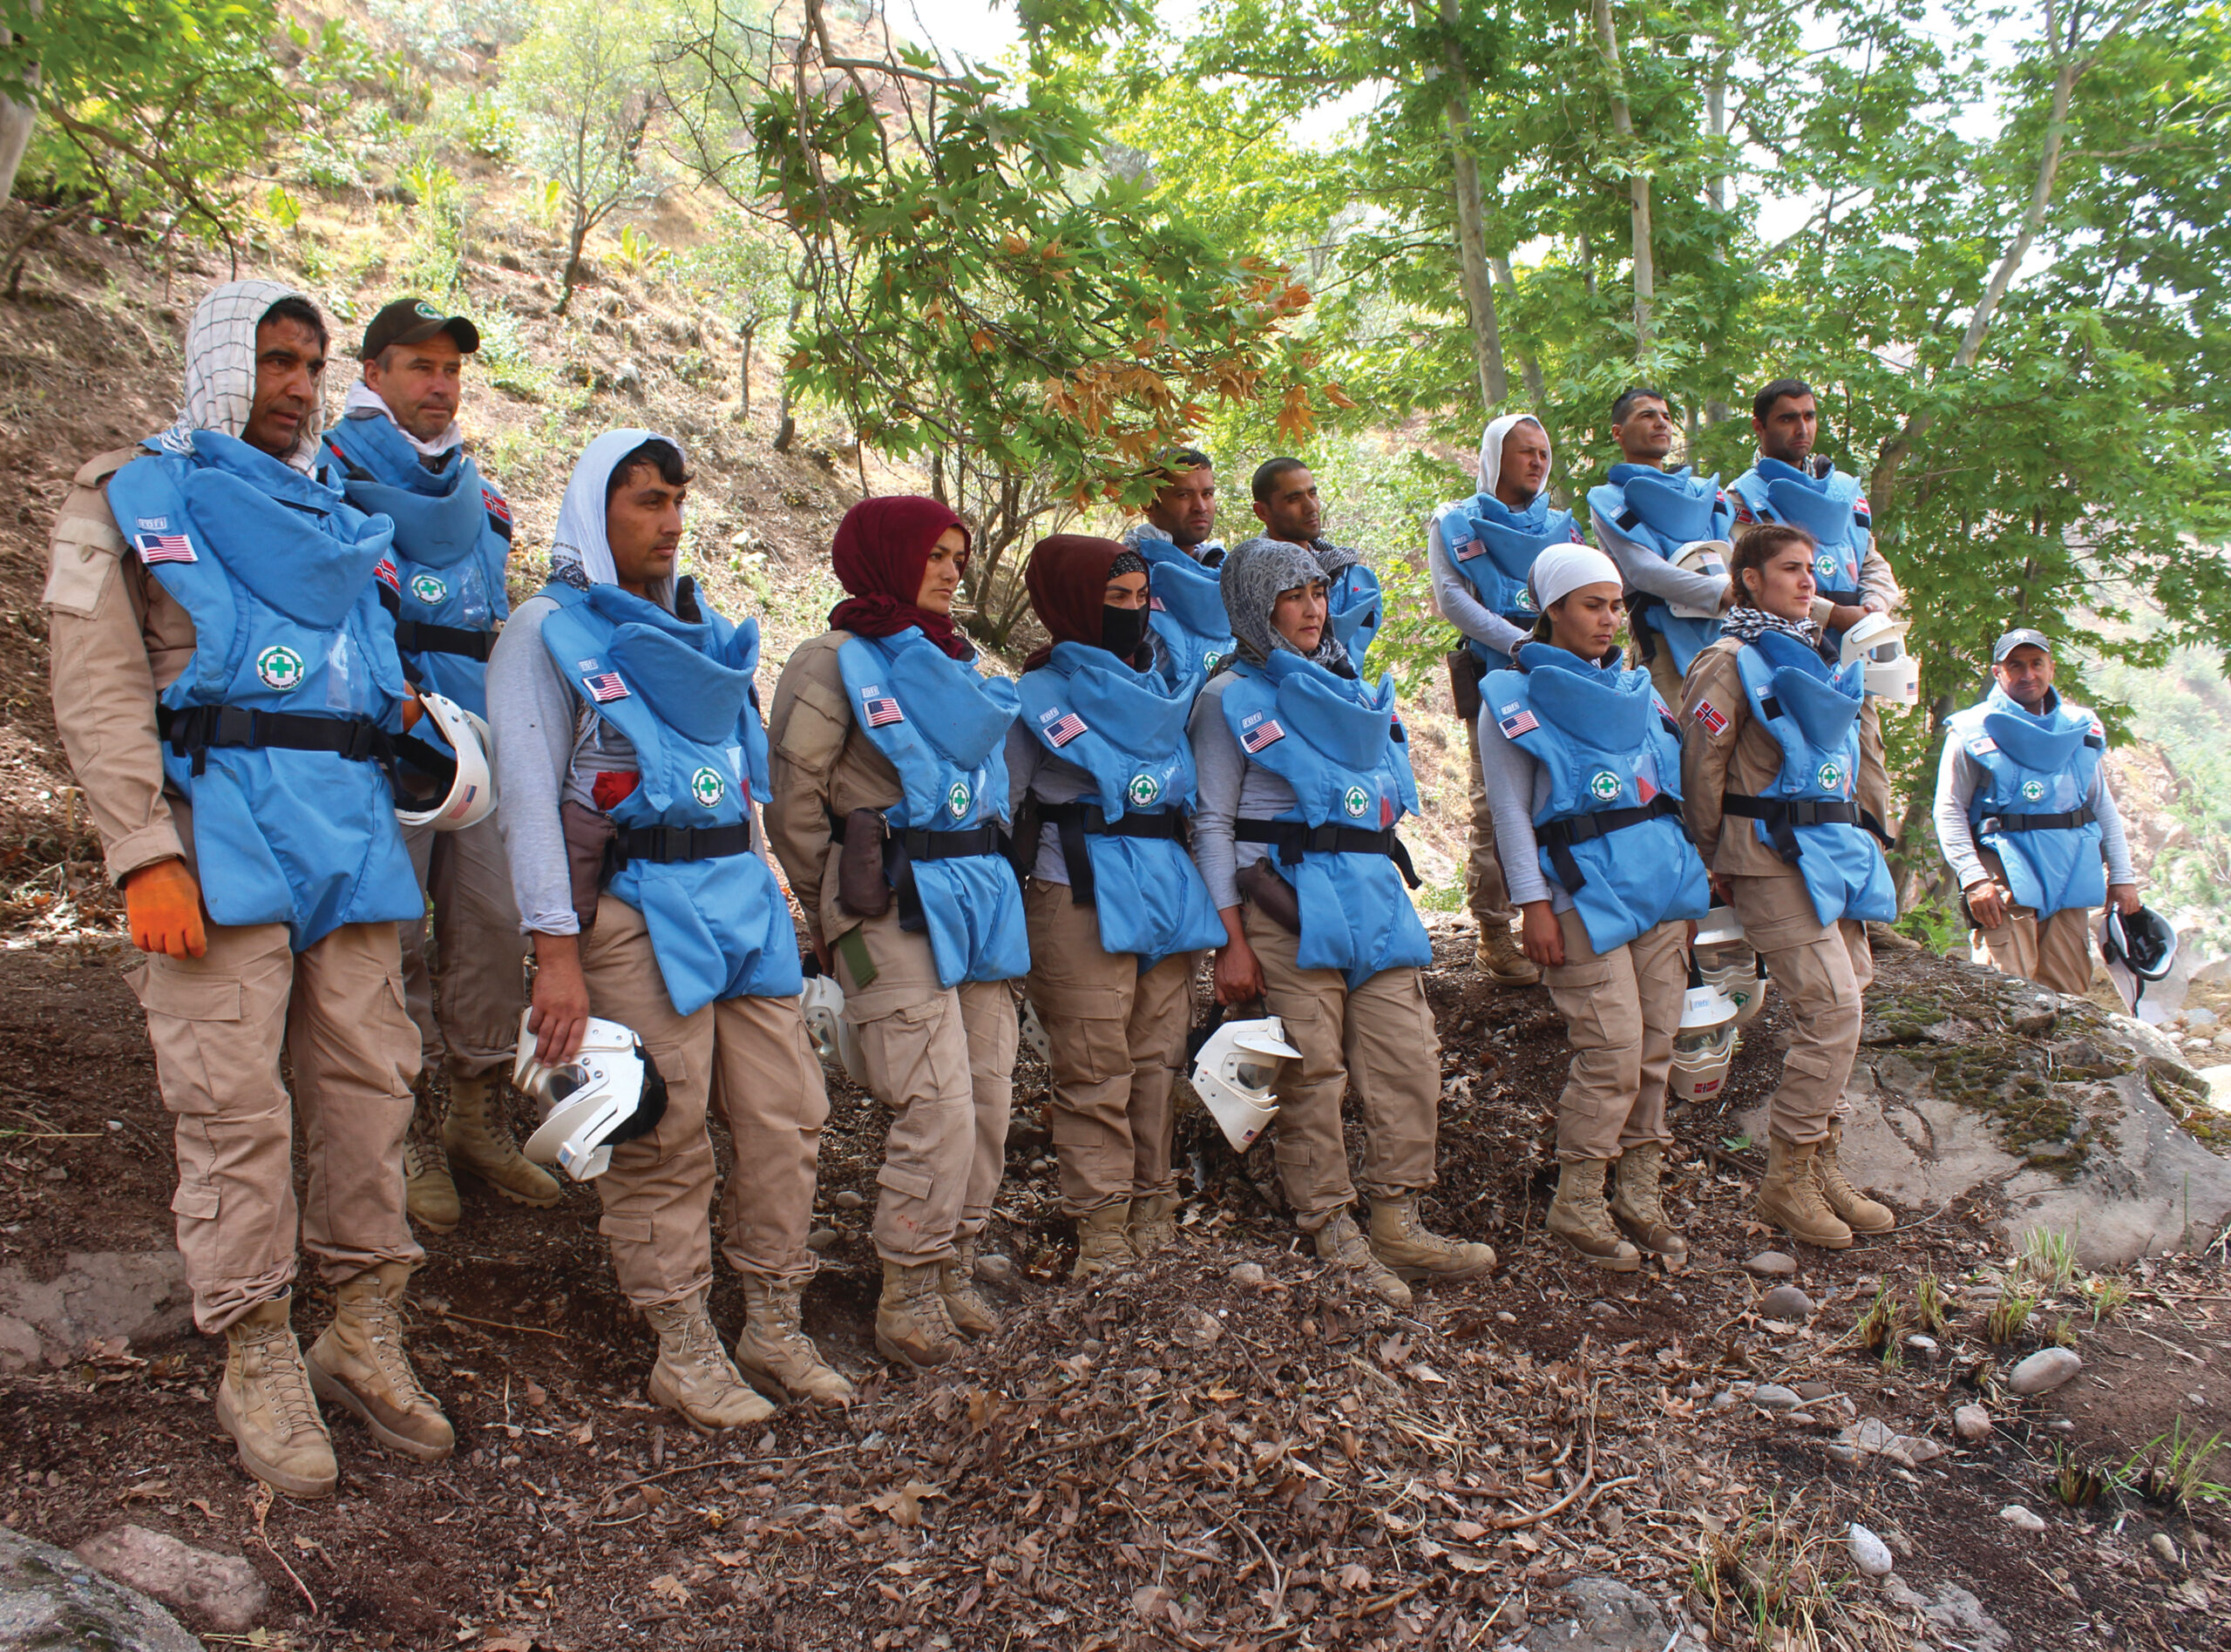 A group of people in protective gear standing together